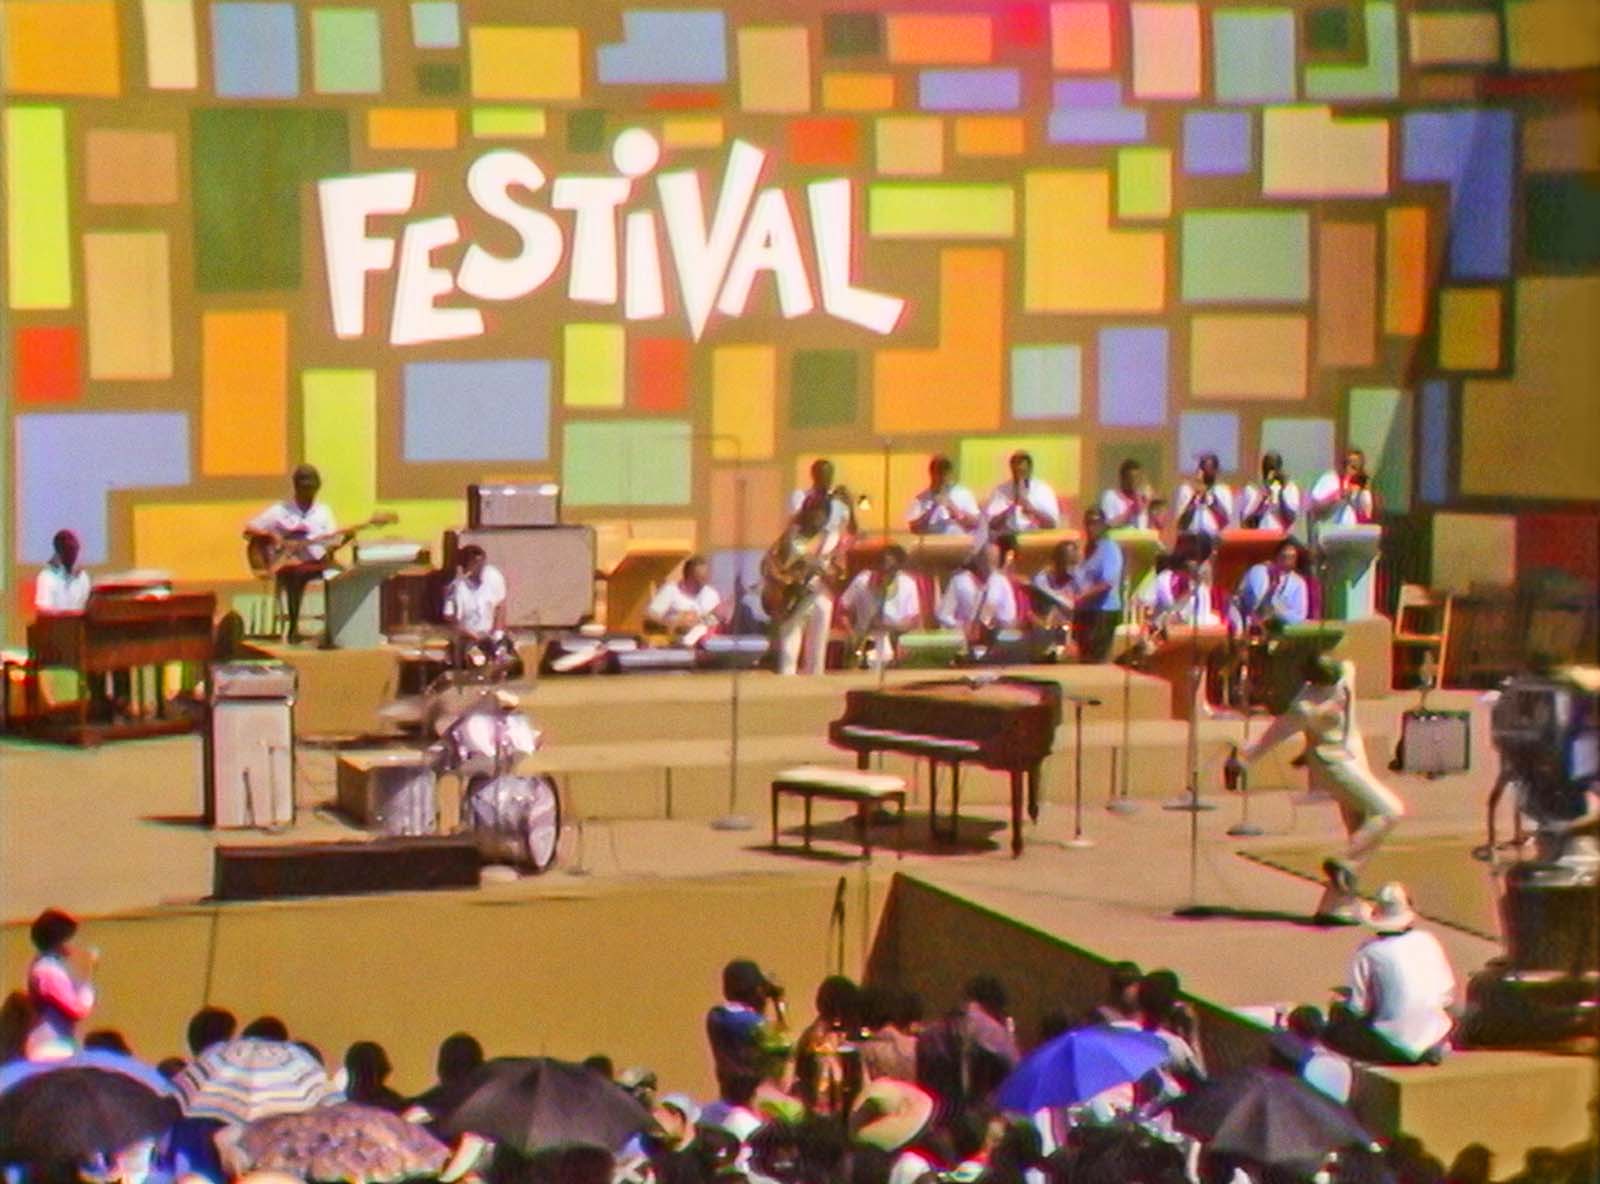 Tony Lawrence hosting the Harlem Cultural Festival in 1969, as featured in Summer of Soul. Image © 20th Century Studios